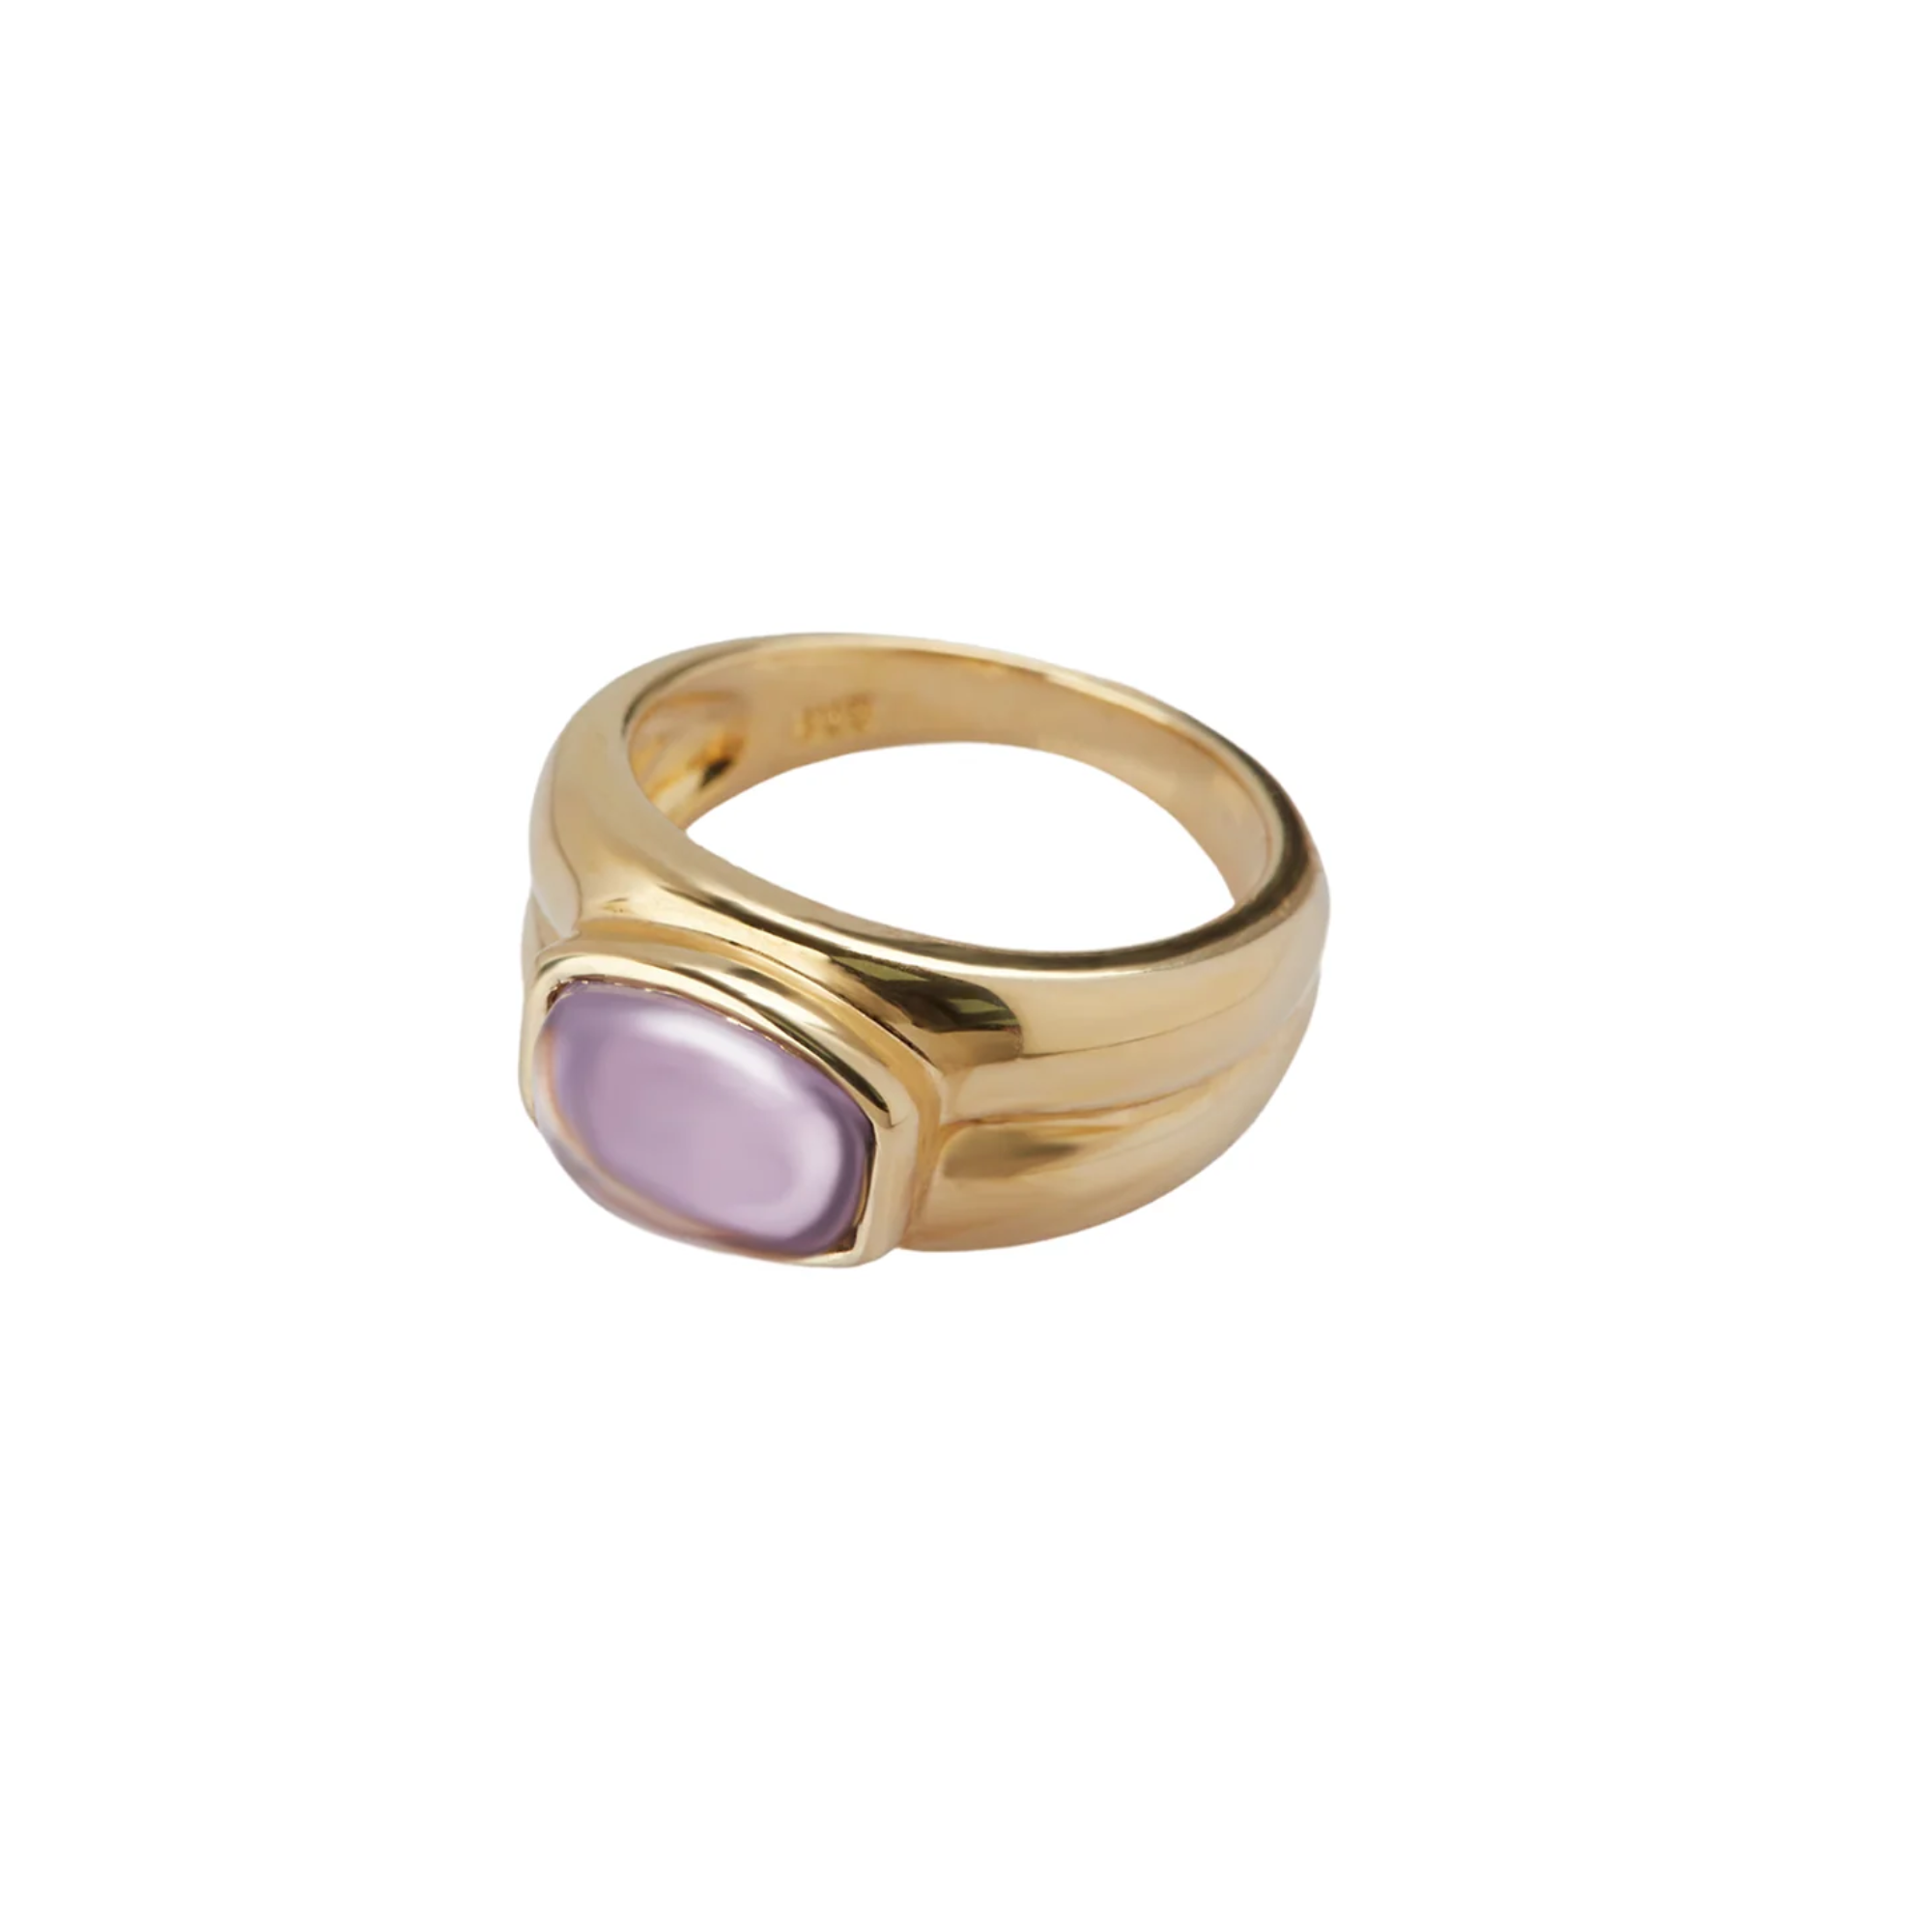 THE DOUBLE DOME GEMSTONE RING